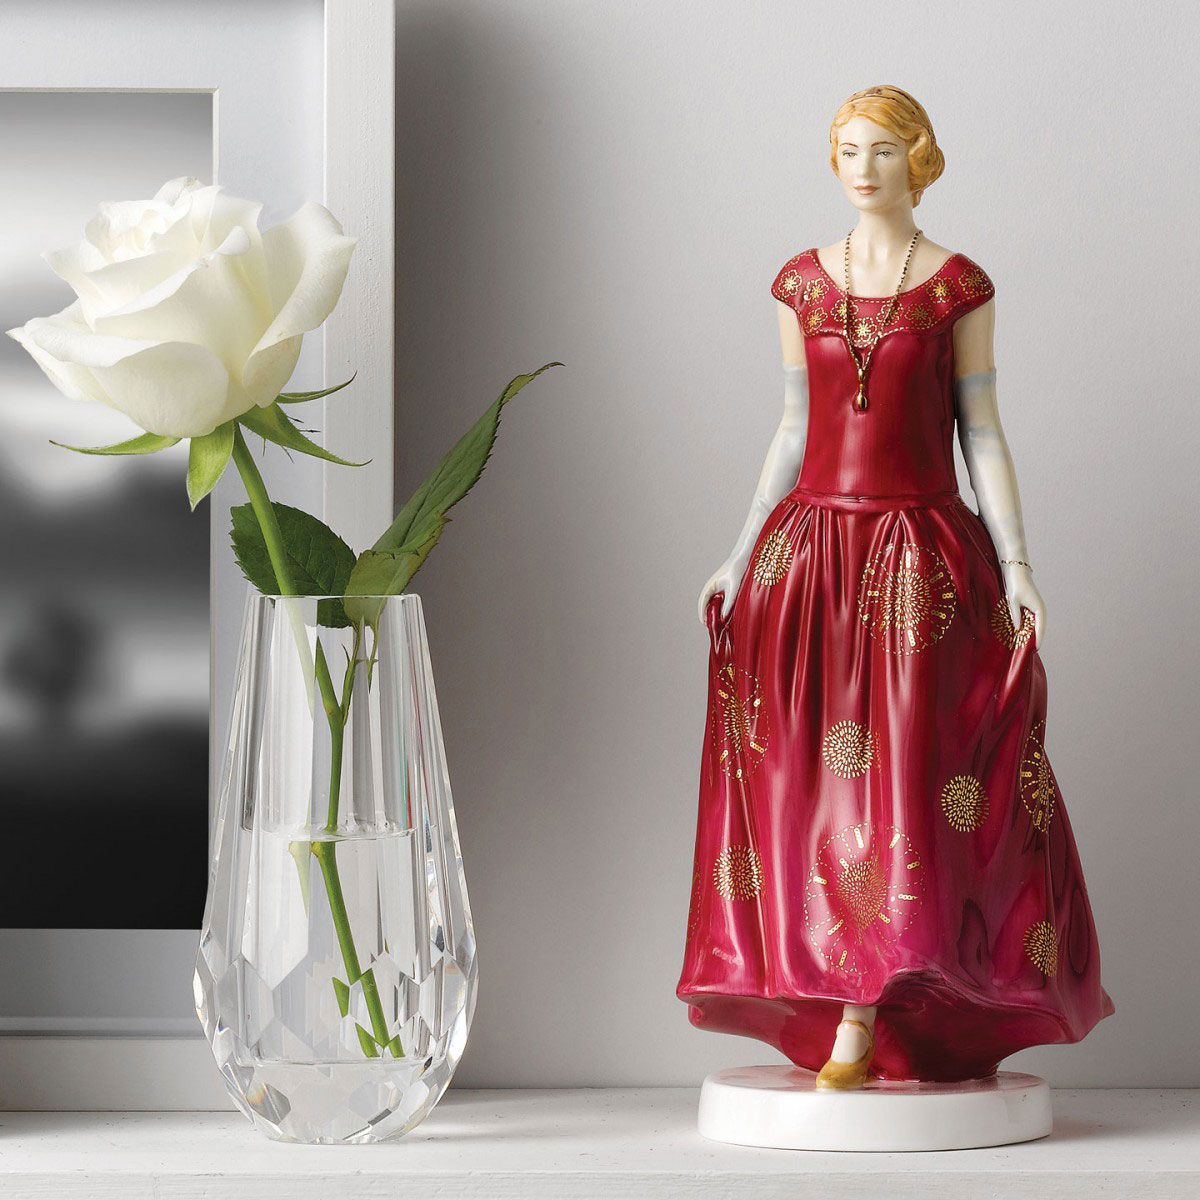 Royal Doulton China Pretty Ladies Lady Rose, Limited Edition